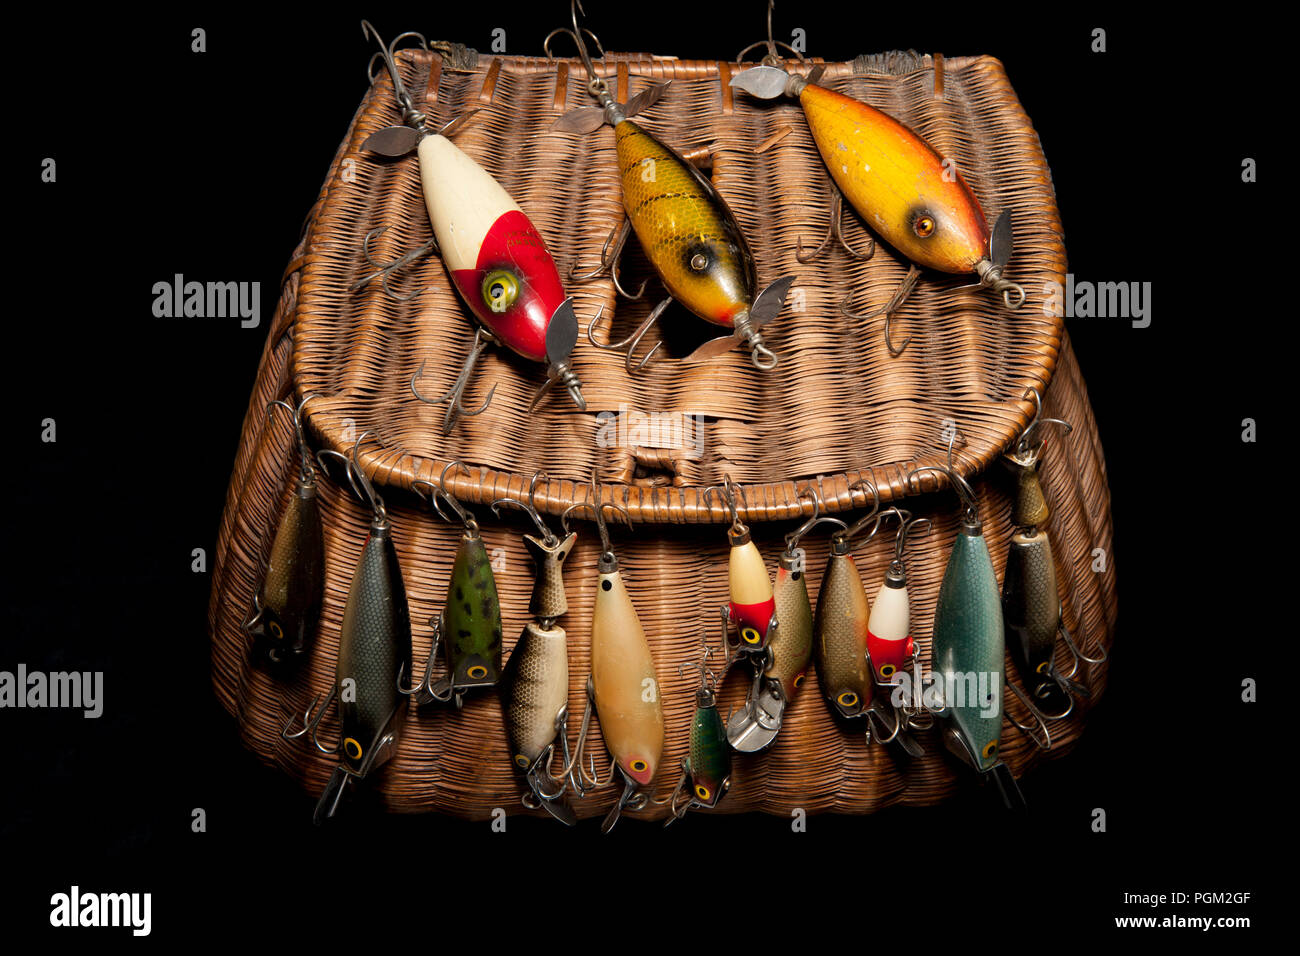 A selection of old fishing lures, or plugs, displayed on an old whicker fishing creel. From a collection of fishing tackle and sporting collectibles.  Stock Photo